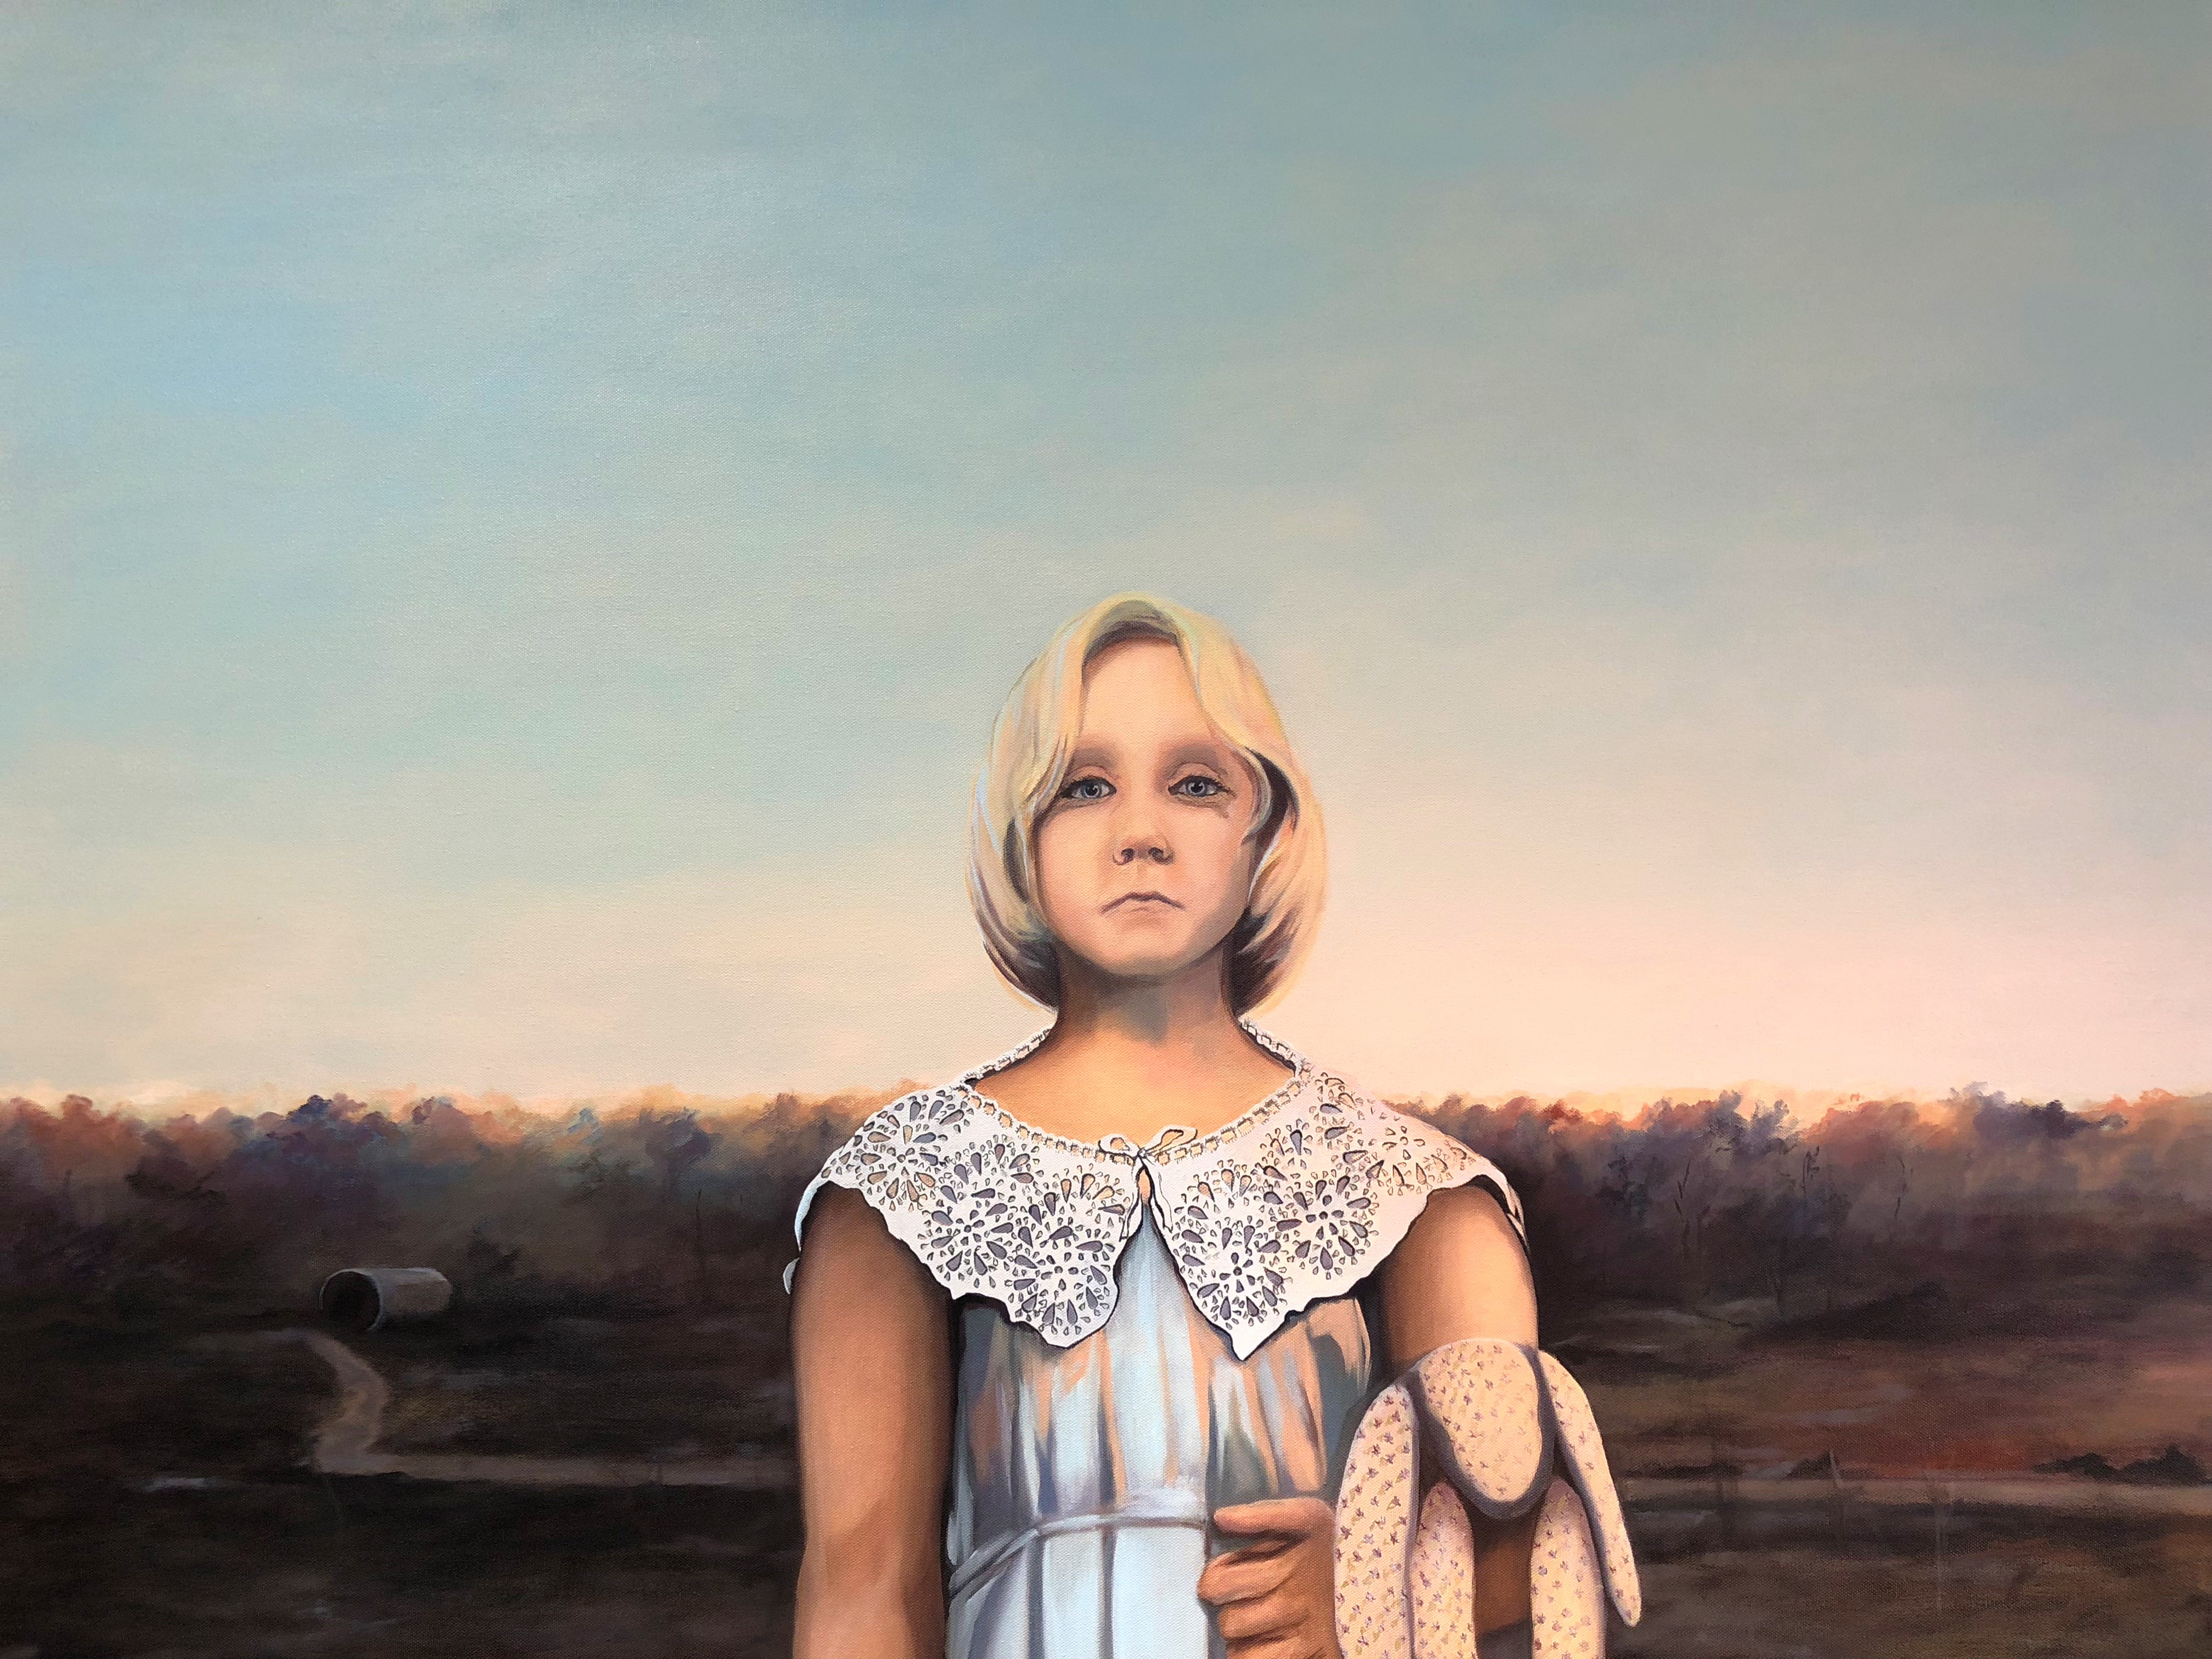 Vesper | Sarah West the Collision of Culture and Lack of Civility series 42x 72x 1.5" Oil on Canvas (2018)